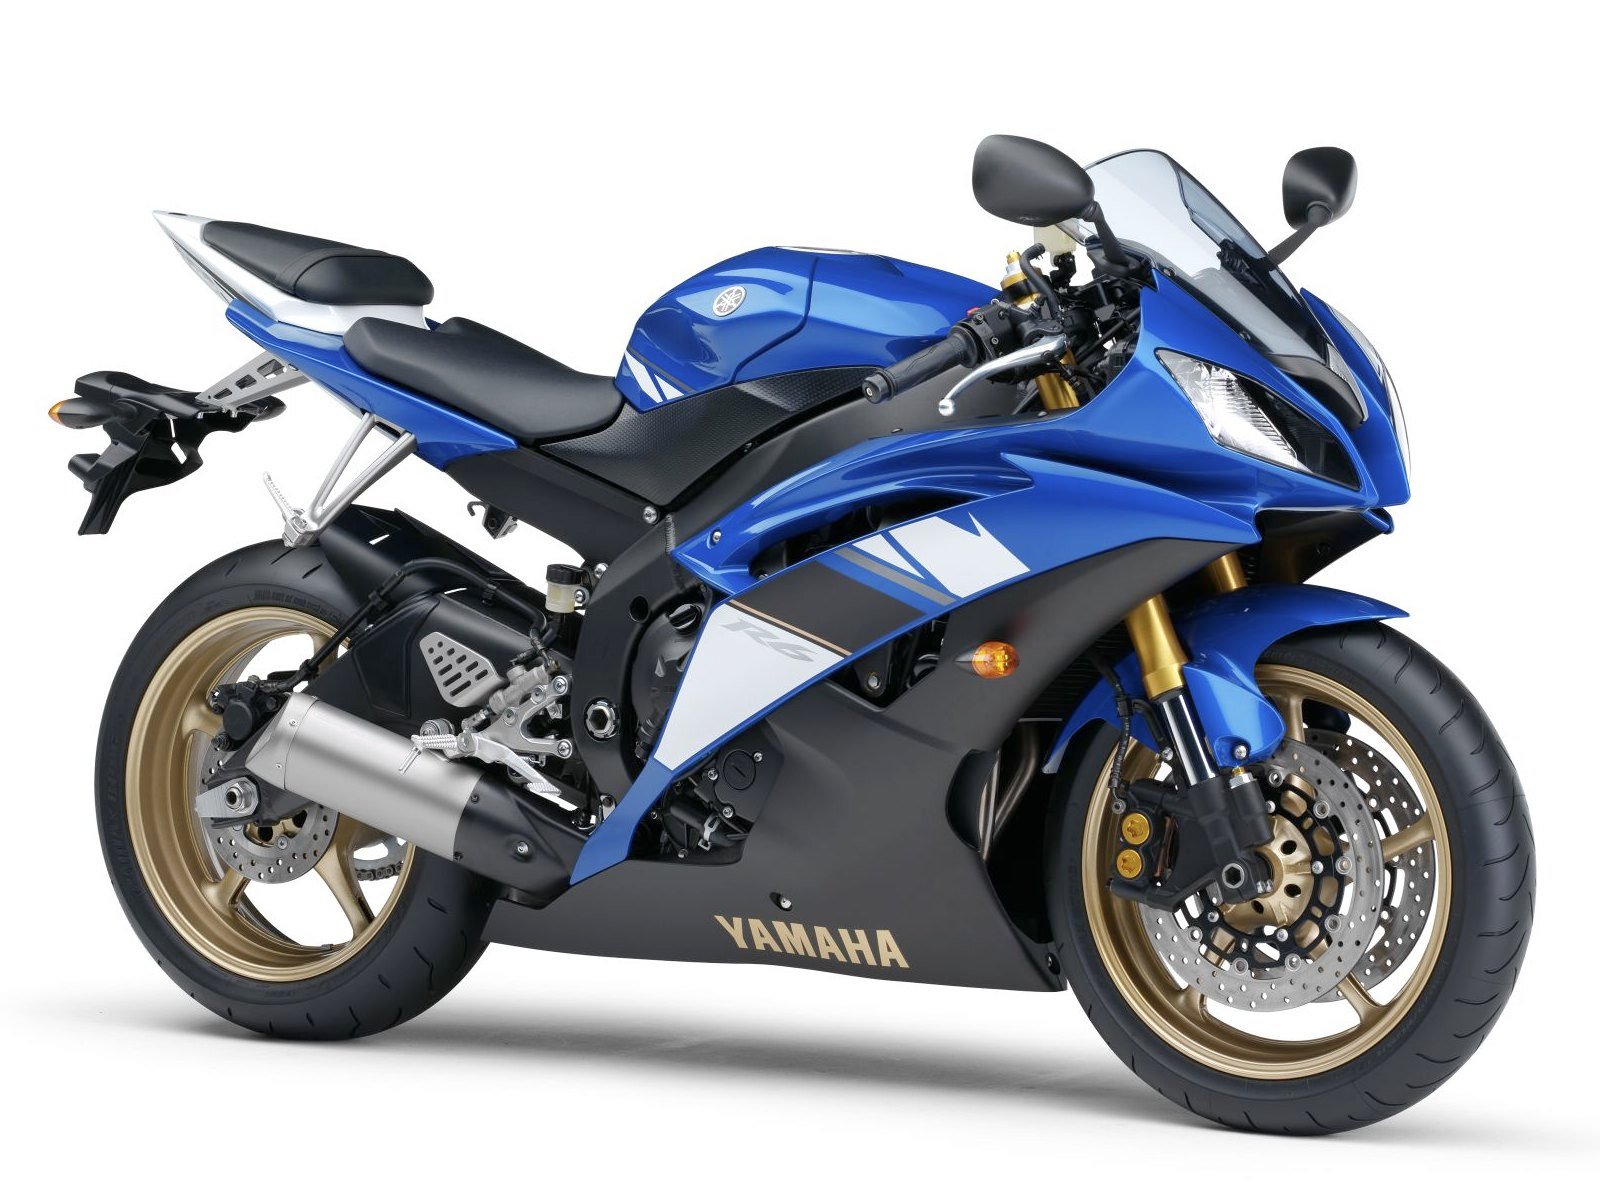 Yamaha YZF R1 Desktop Wallpapers for HD Widescreen and Mobile 1600x1200